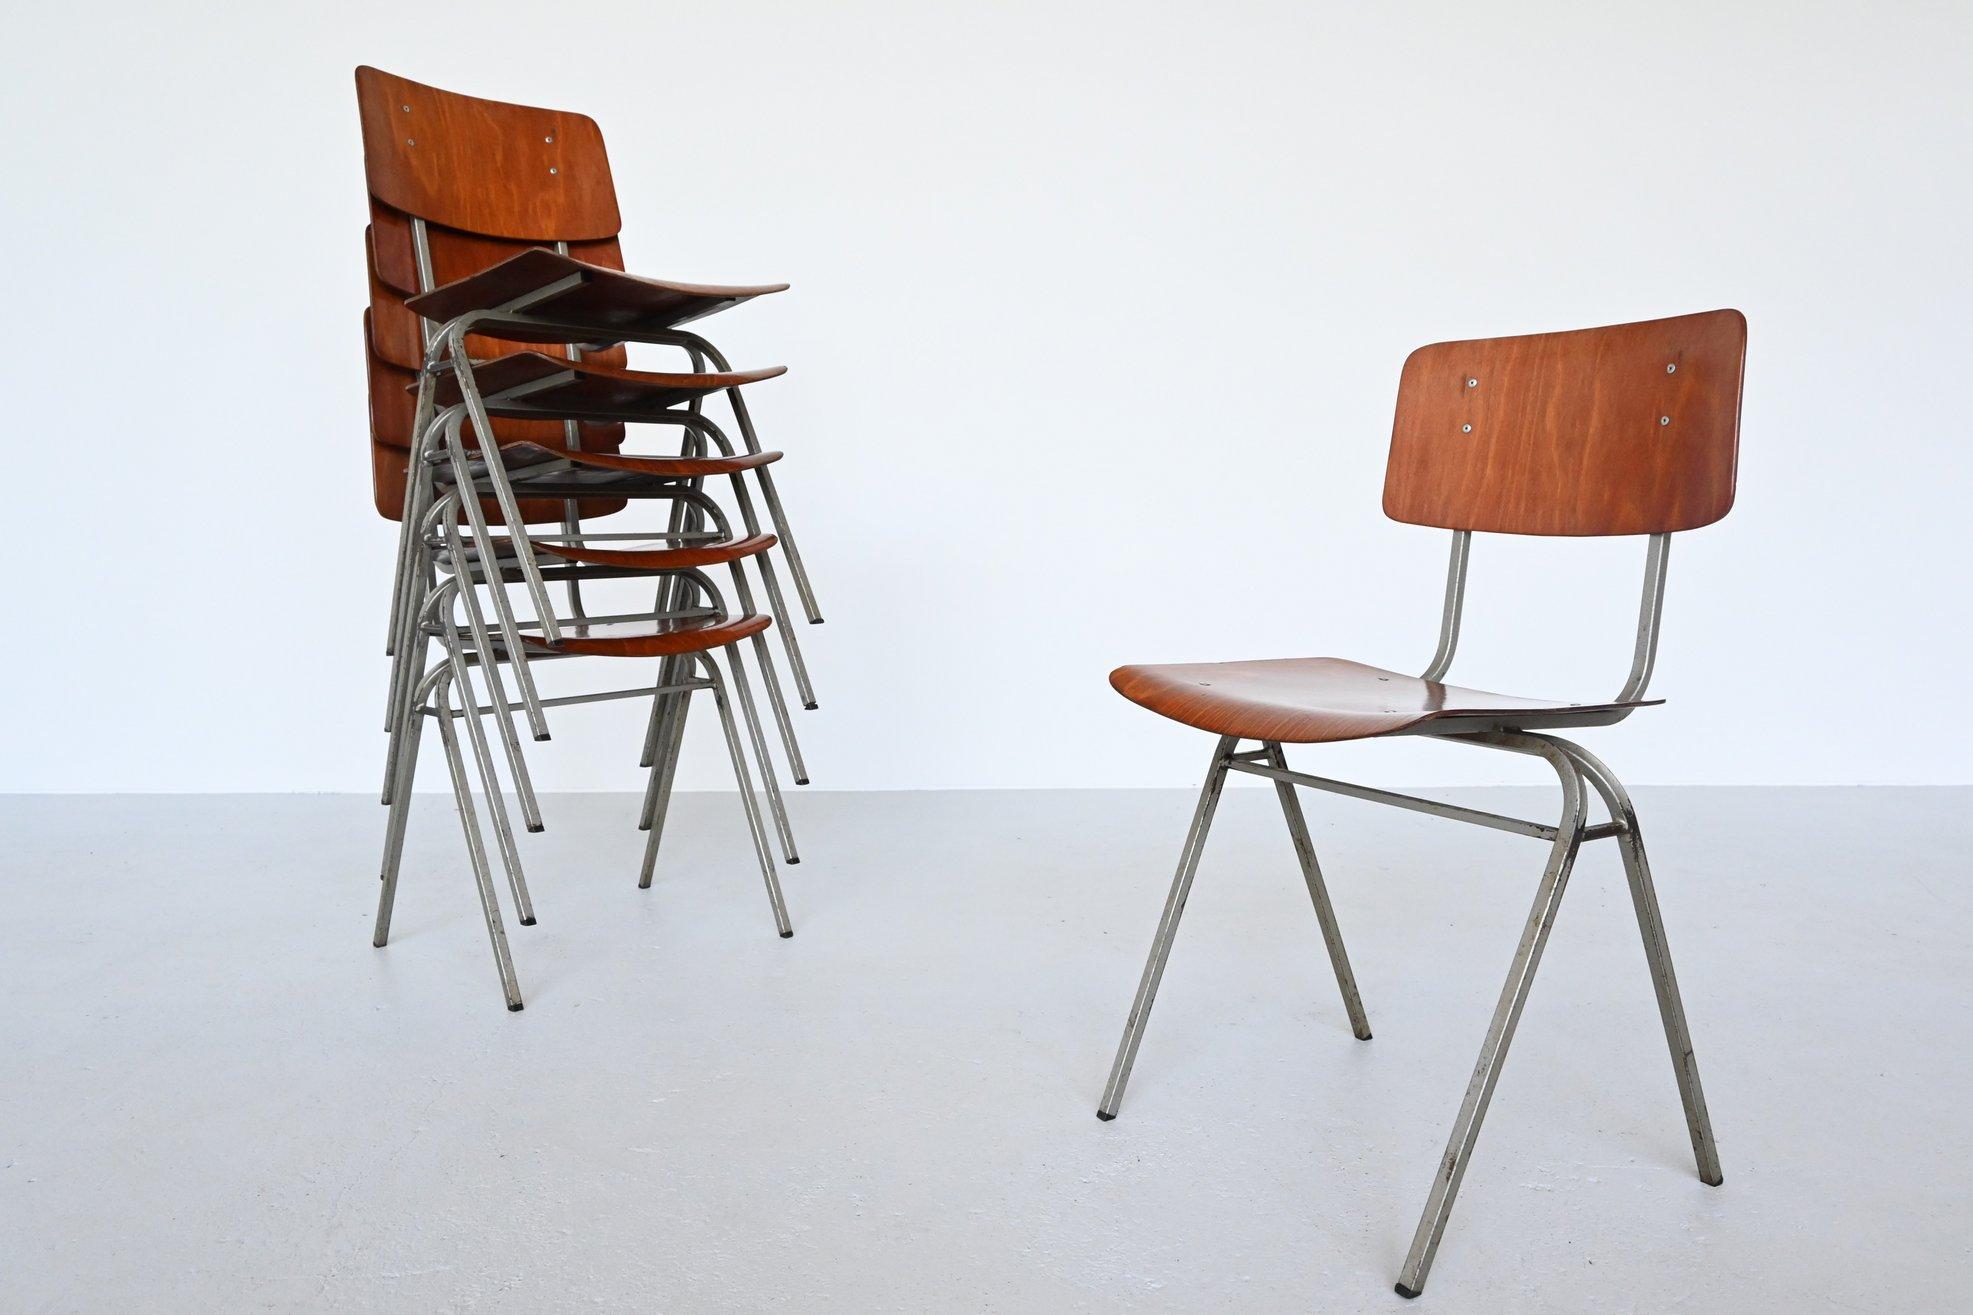 Mid-20th Century Dutch Industrial Stacking Chairs, the Netherlands, 1960